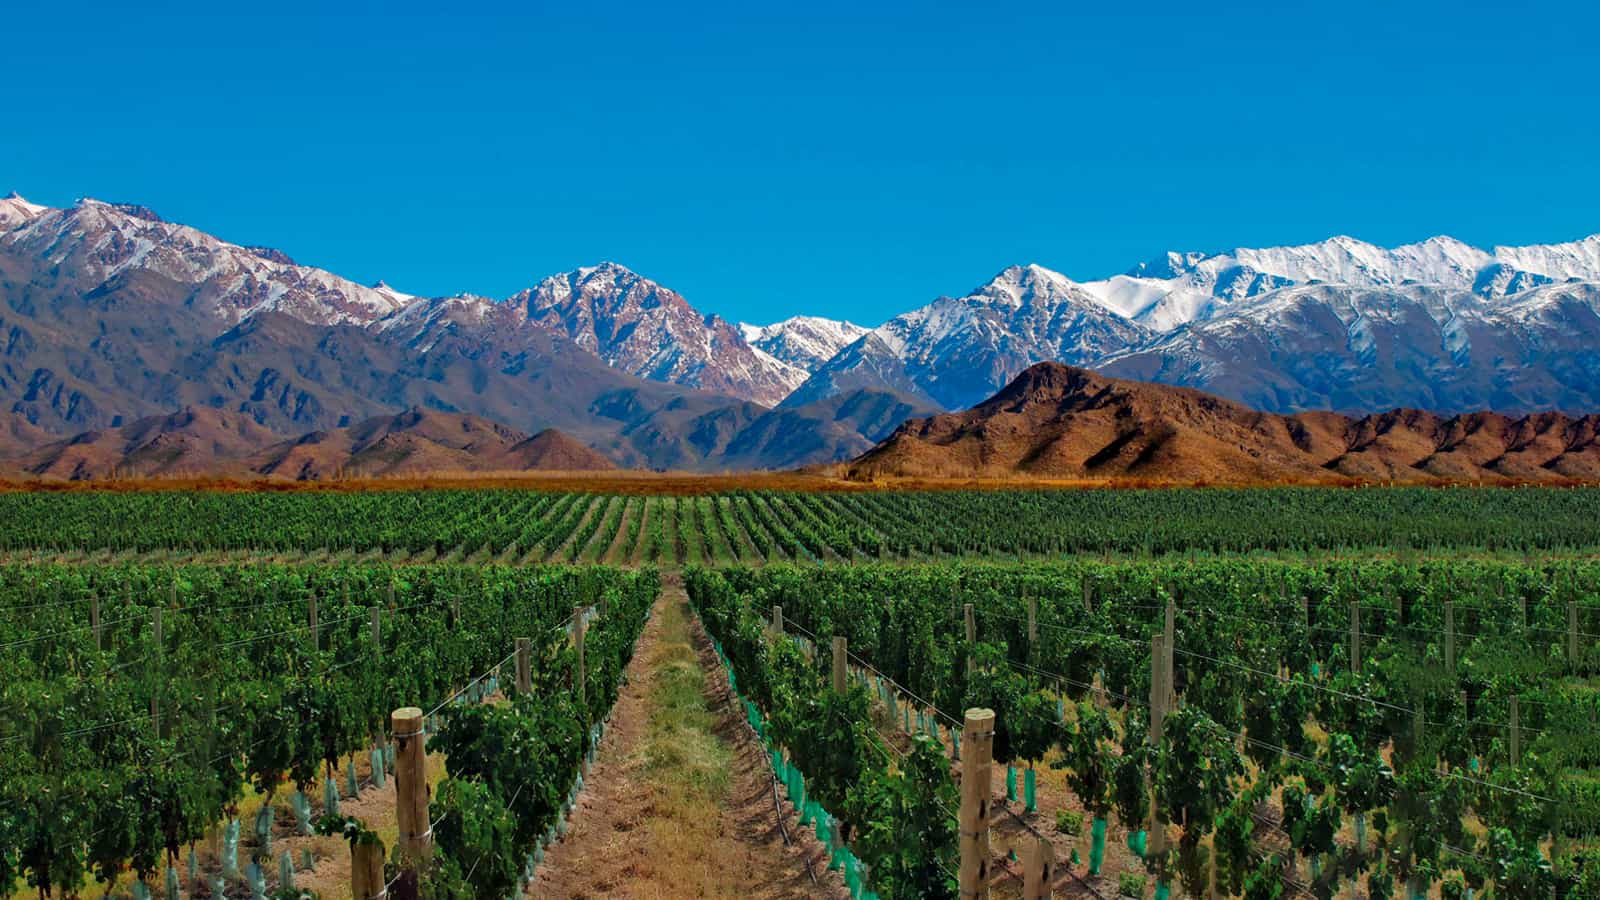 Chose to flight with a Private Jet to Mendoza and enjoy its wine